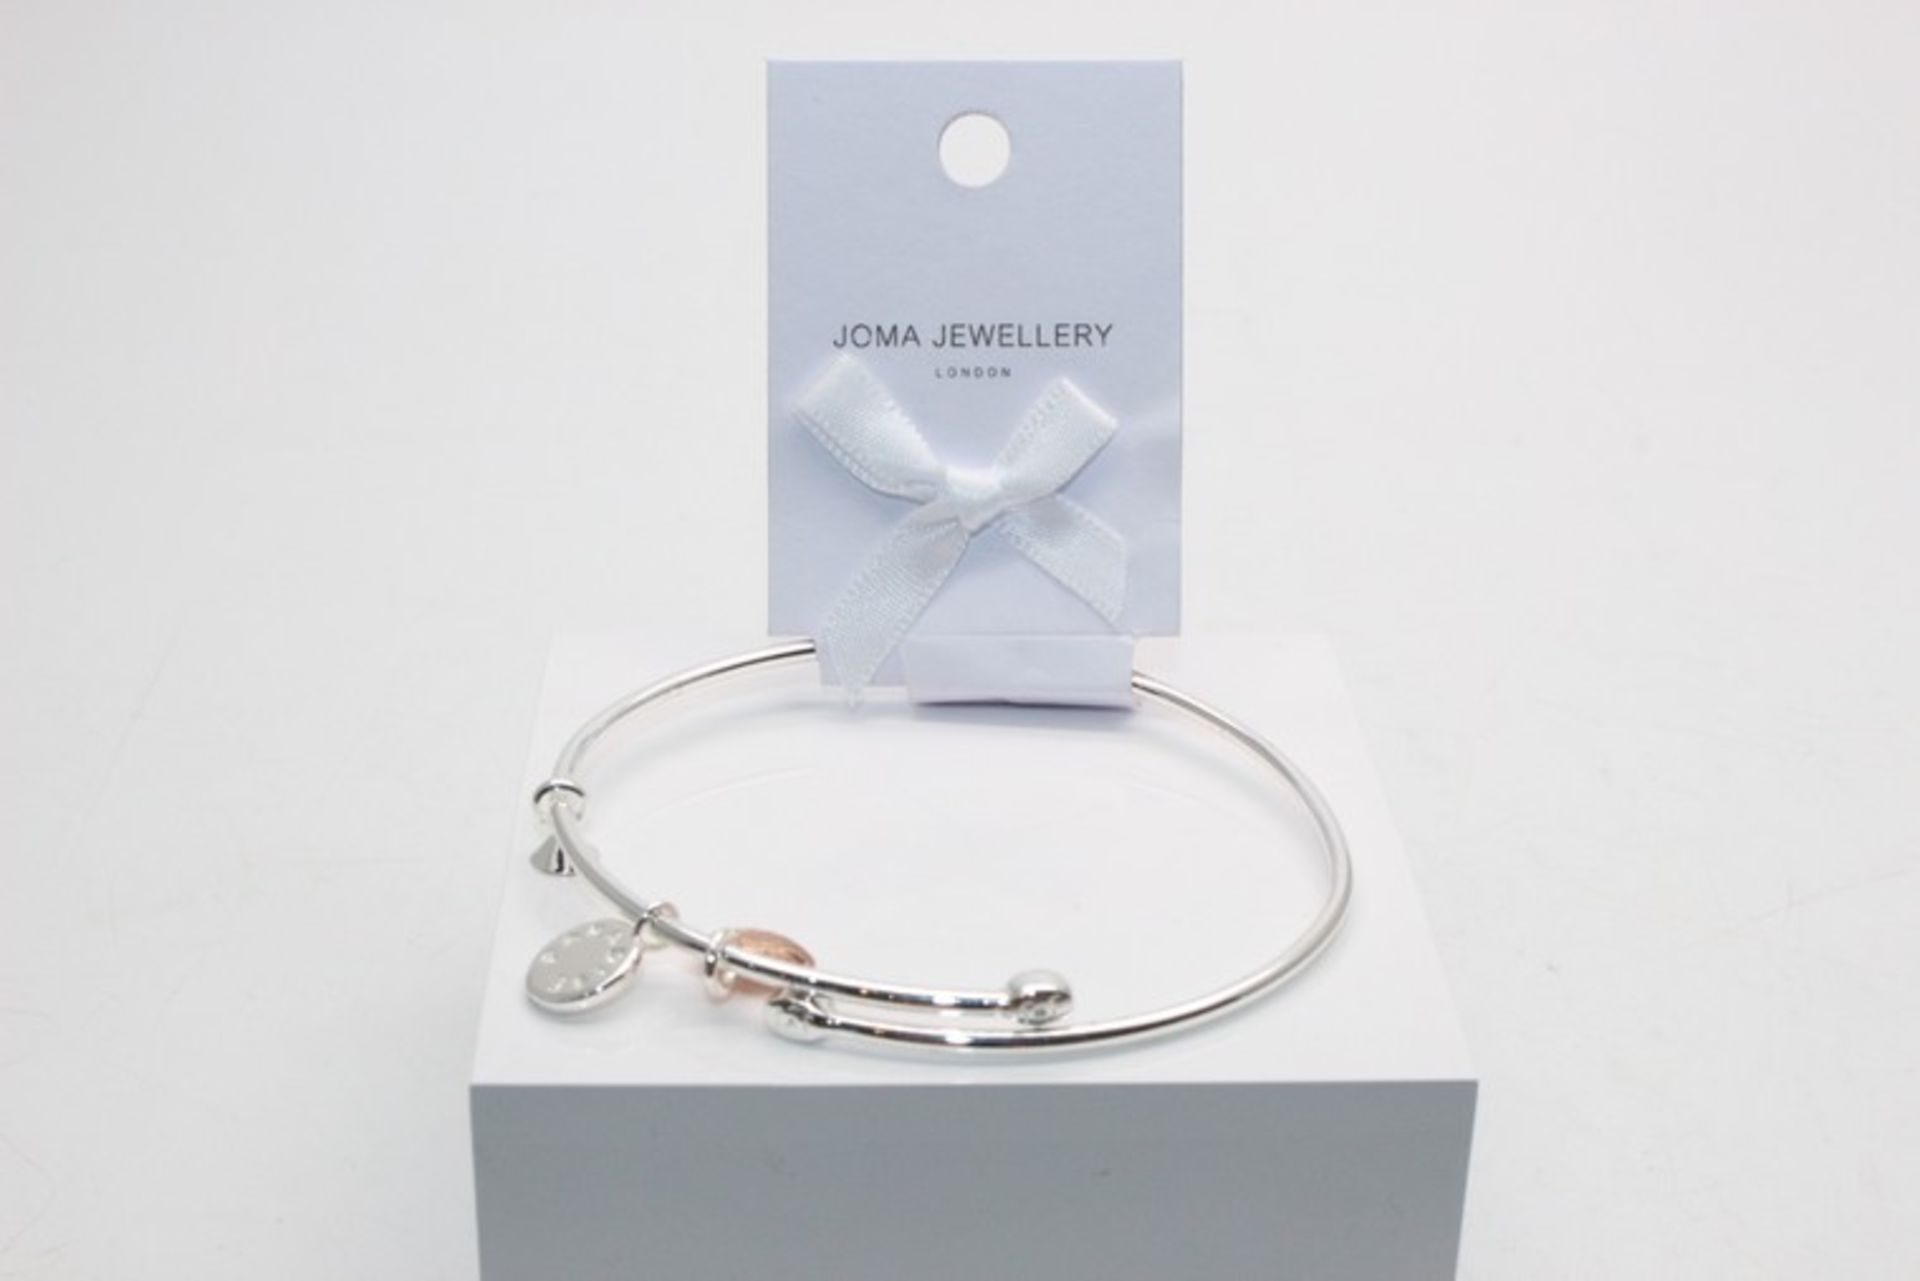 1 x JOMA JEWELLERY WOMENS DESIGNER BANGLE (07.09.17) *PLEASE NOTE THAT THE BID PRICE IS MULTIPLIED